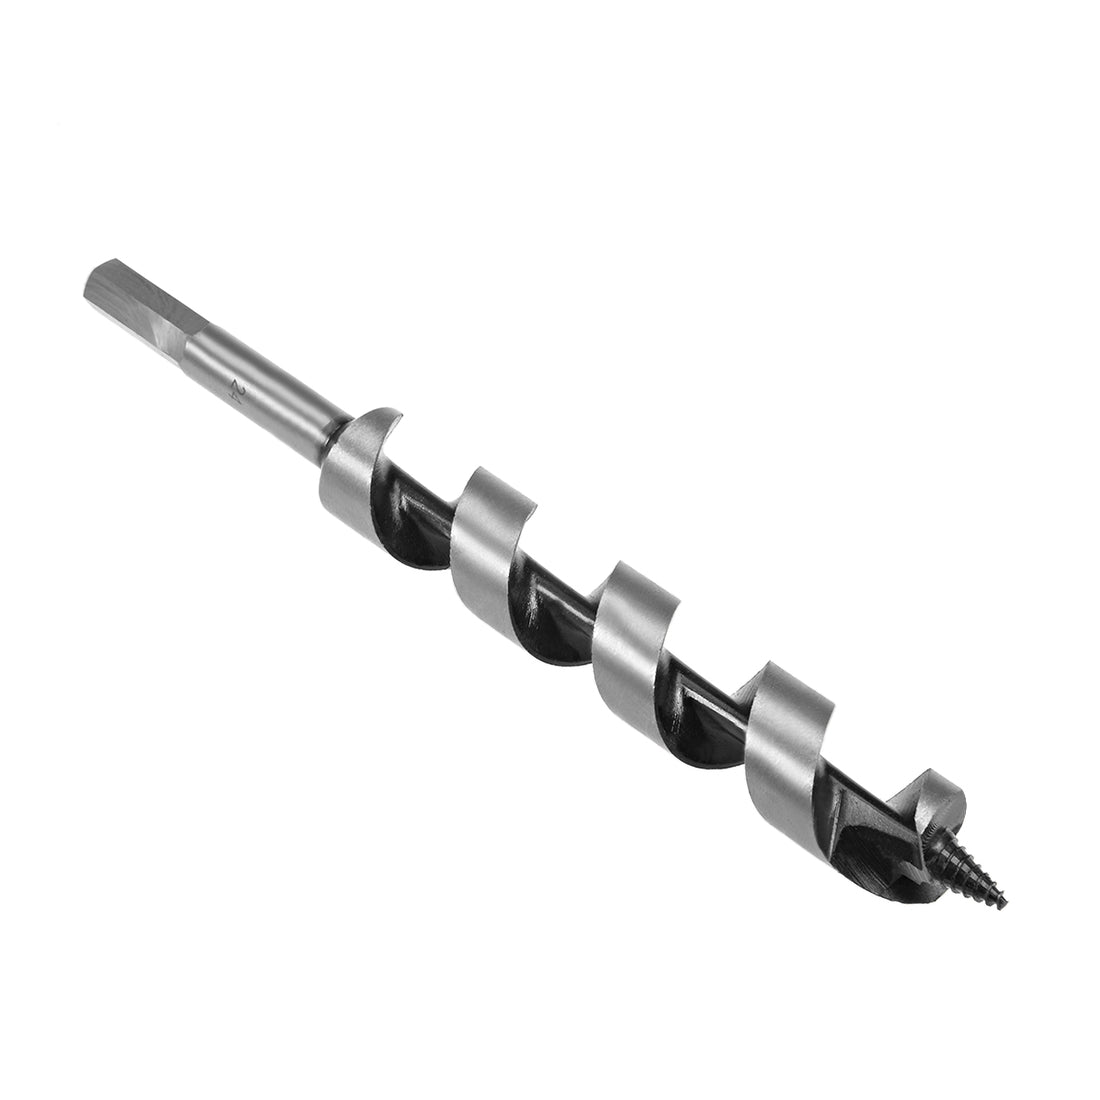 uxcell Uxcell Auger Drill Bit Wood Hex Shank 24mm Cutting Dia High Carbon Steel for Electric Bench Drill Woodworking Carpentry